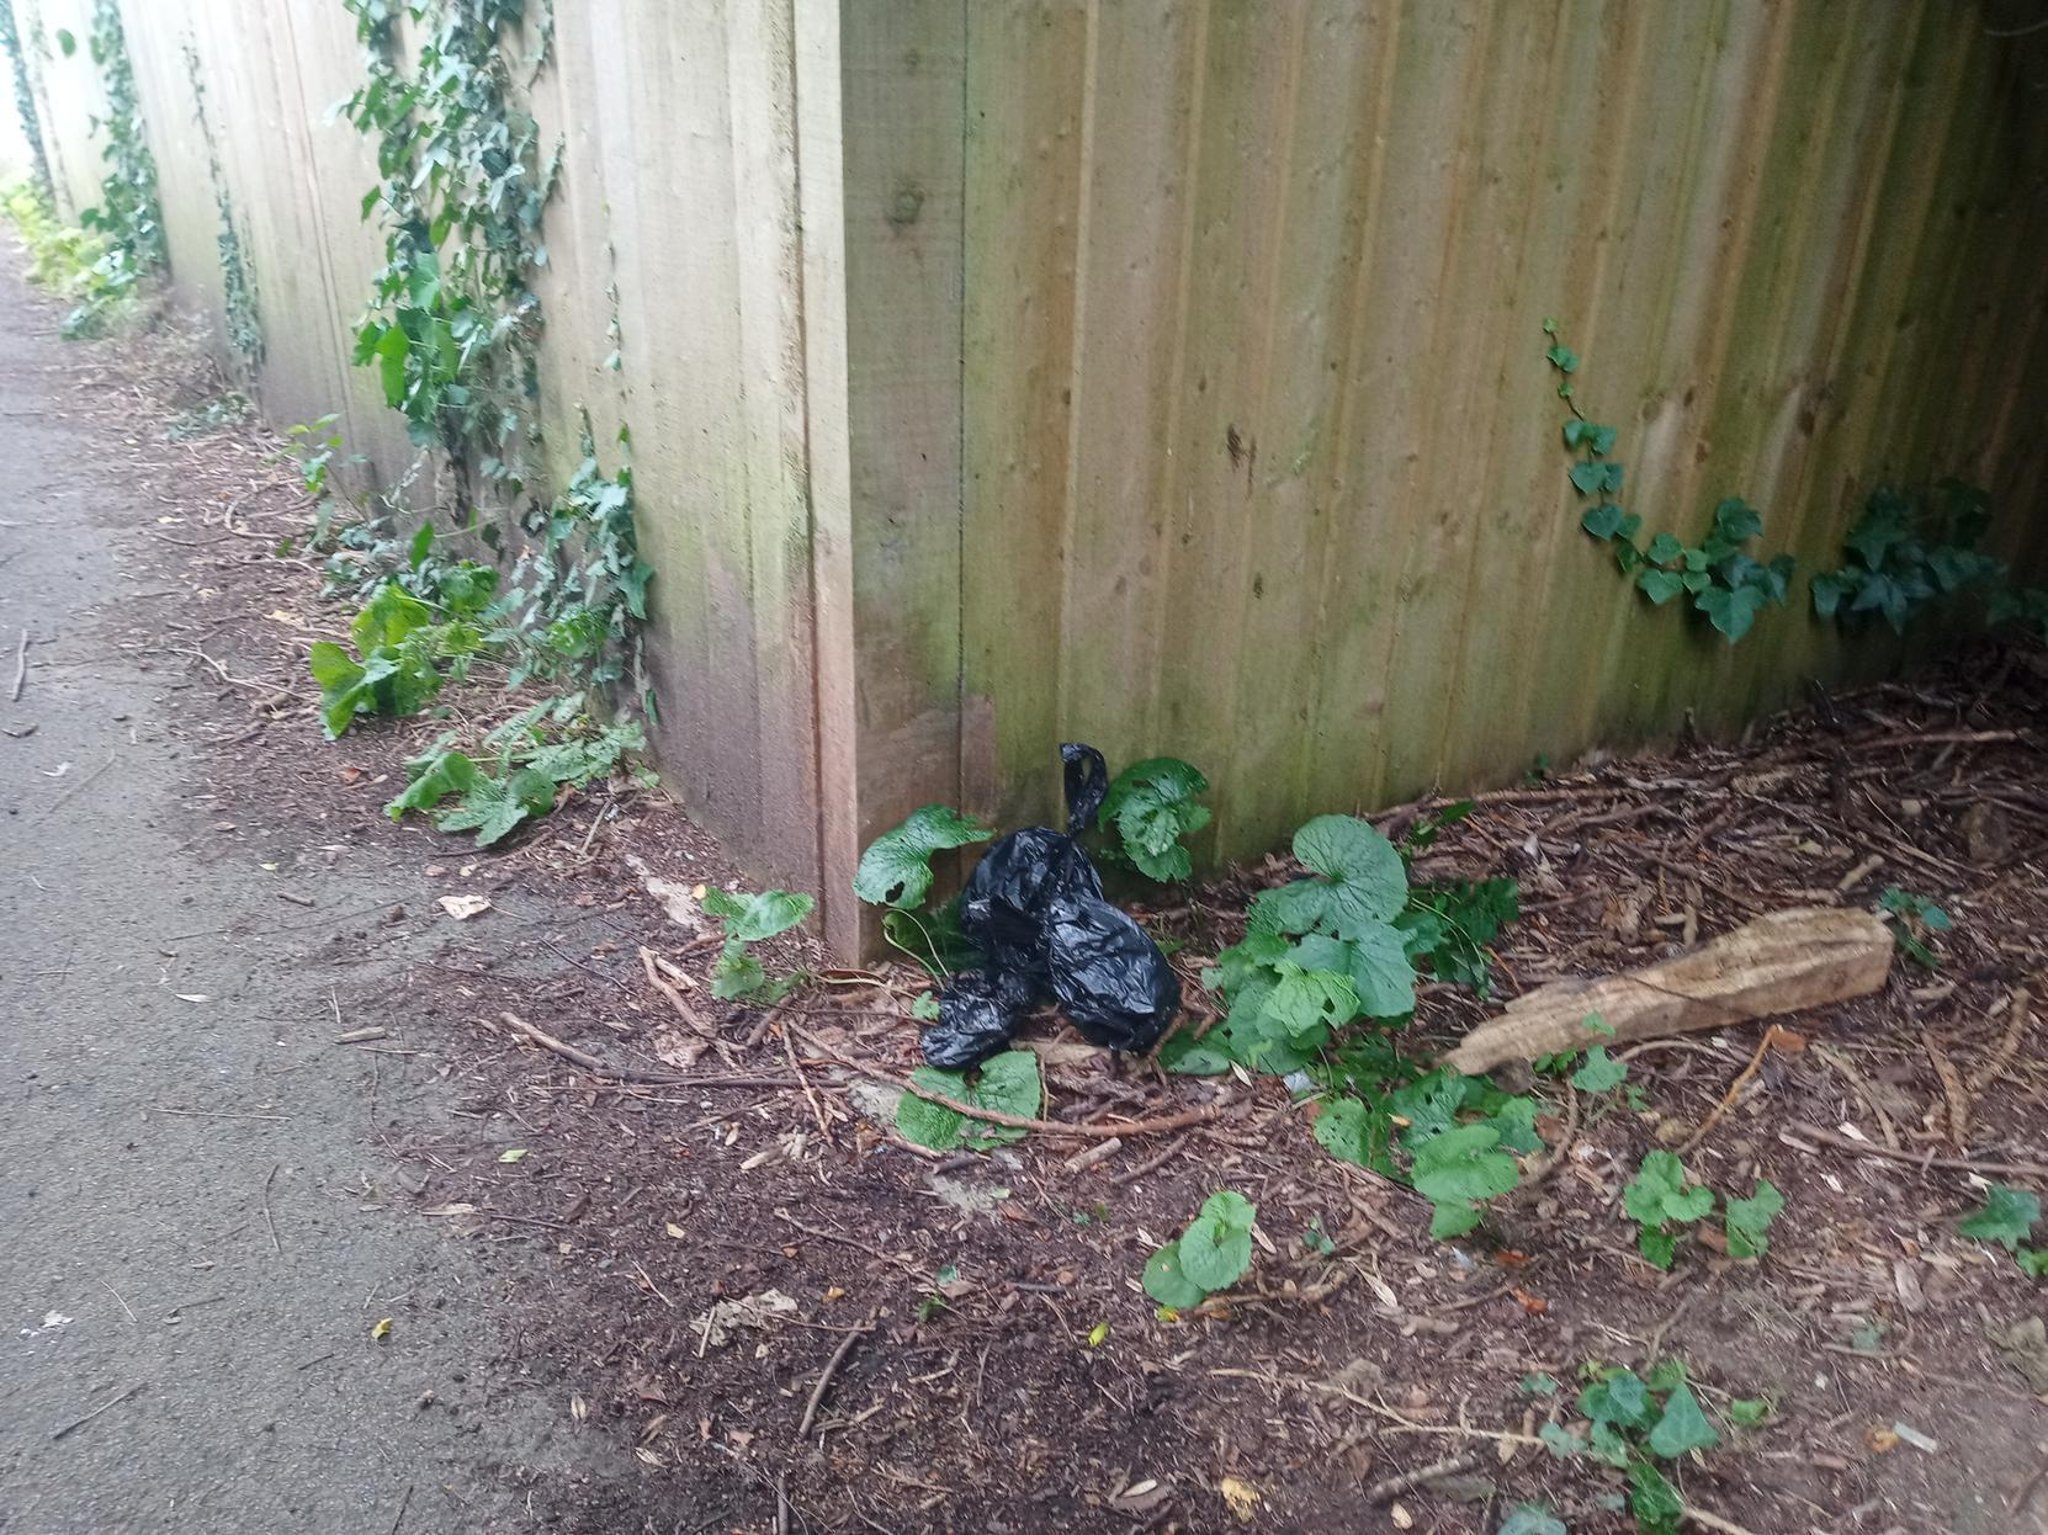 Disgusting: Dog walkers continue to dump plastic bags of their pets’ mess in a Harborough alley